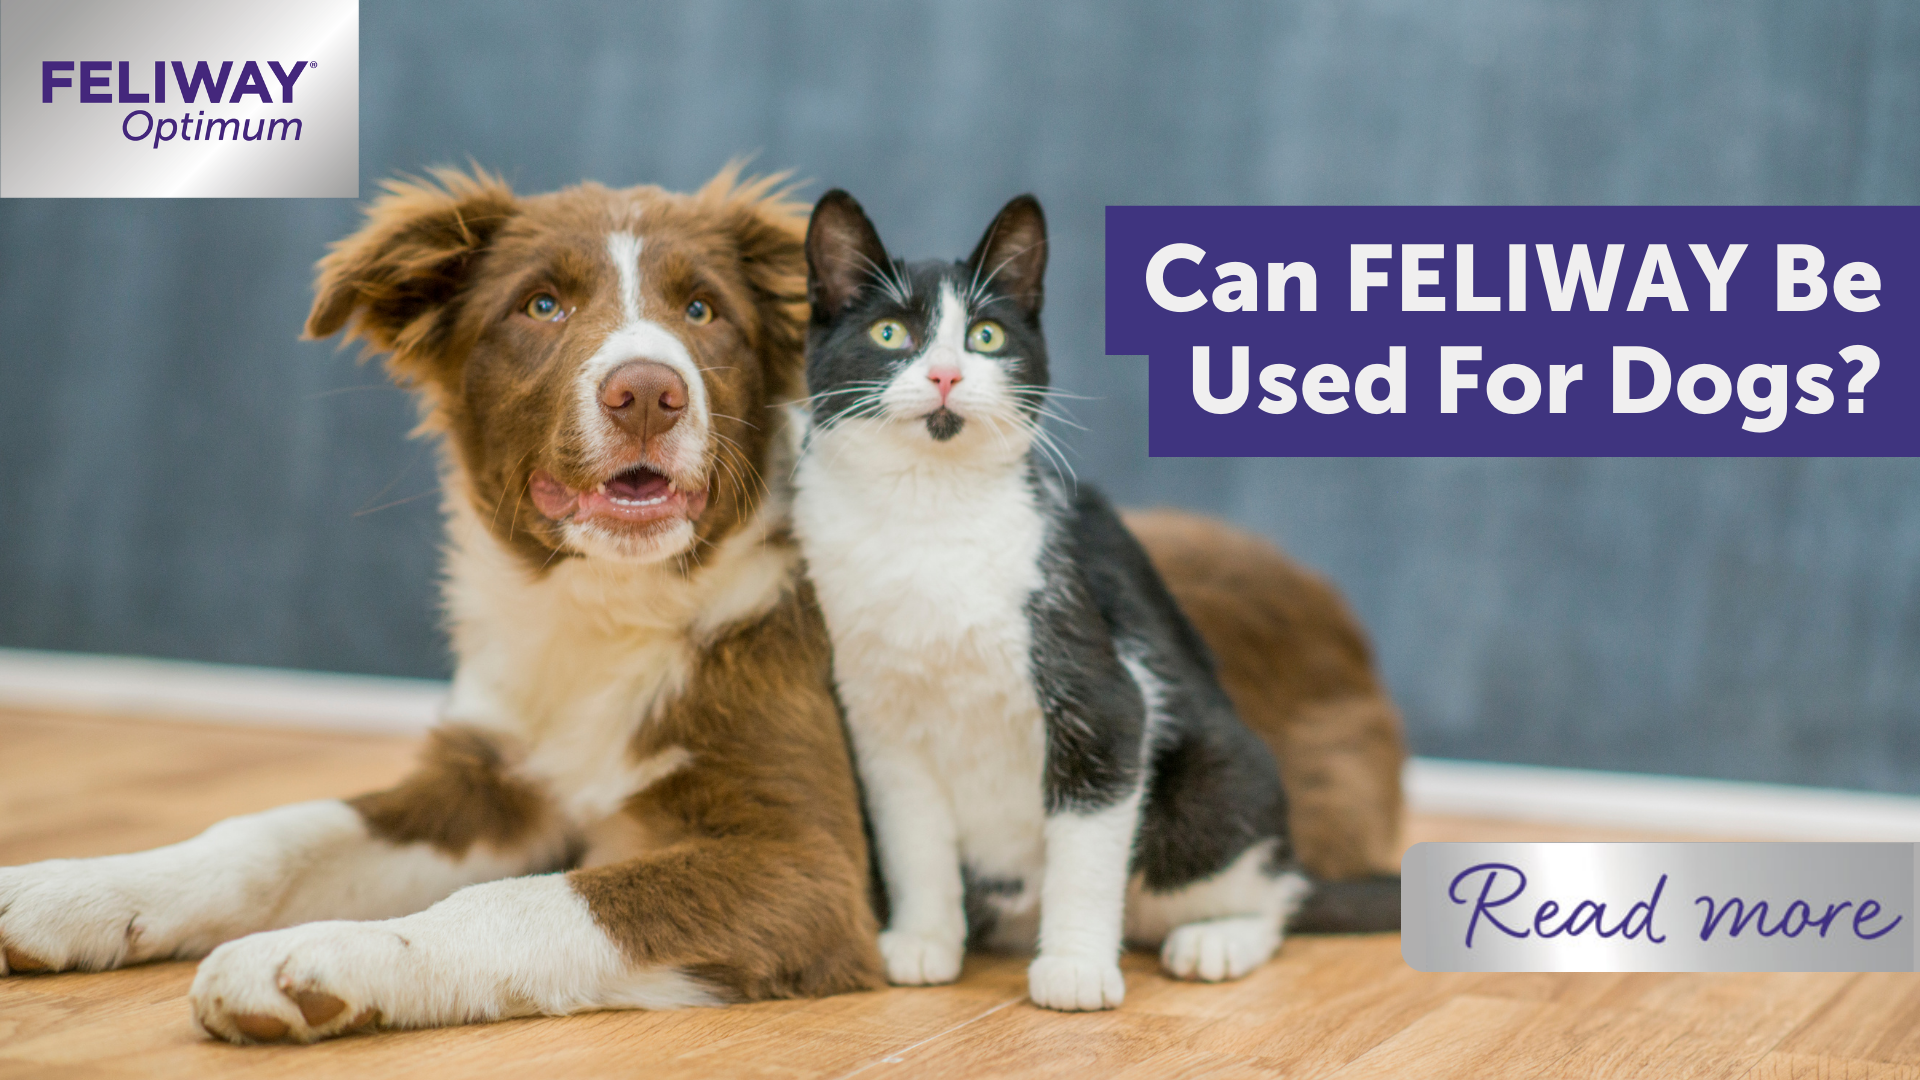 Can FELIWAY Be Used For Dogs?